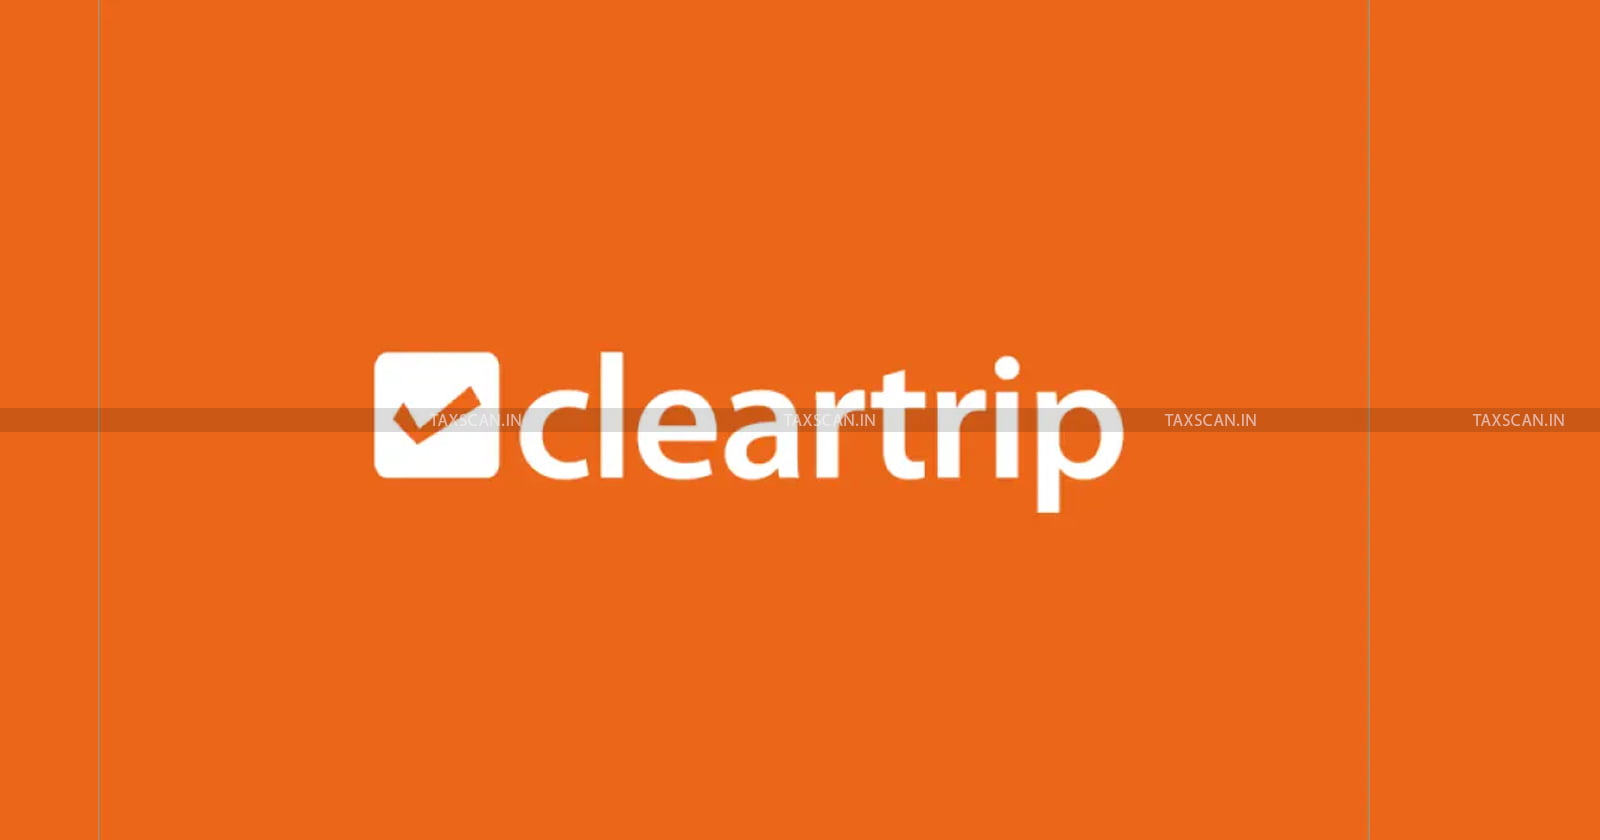 Relief - Cleartrip - Proviso - Non-resident - Investors rules - ITAT - taxscan